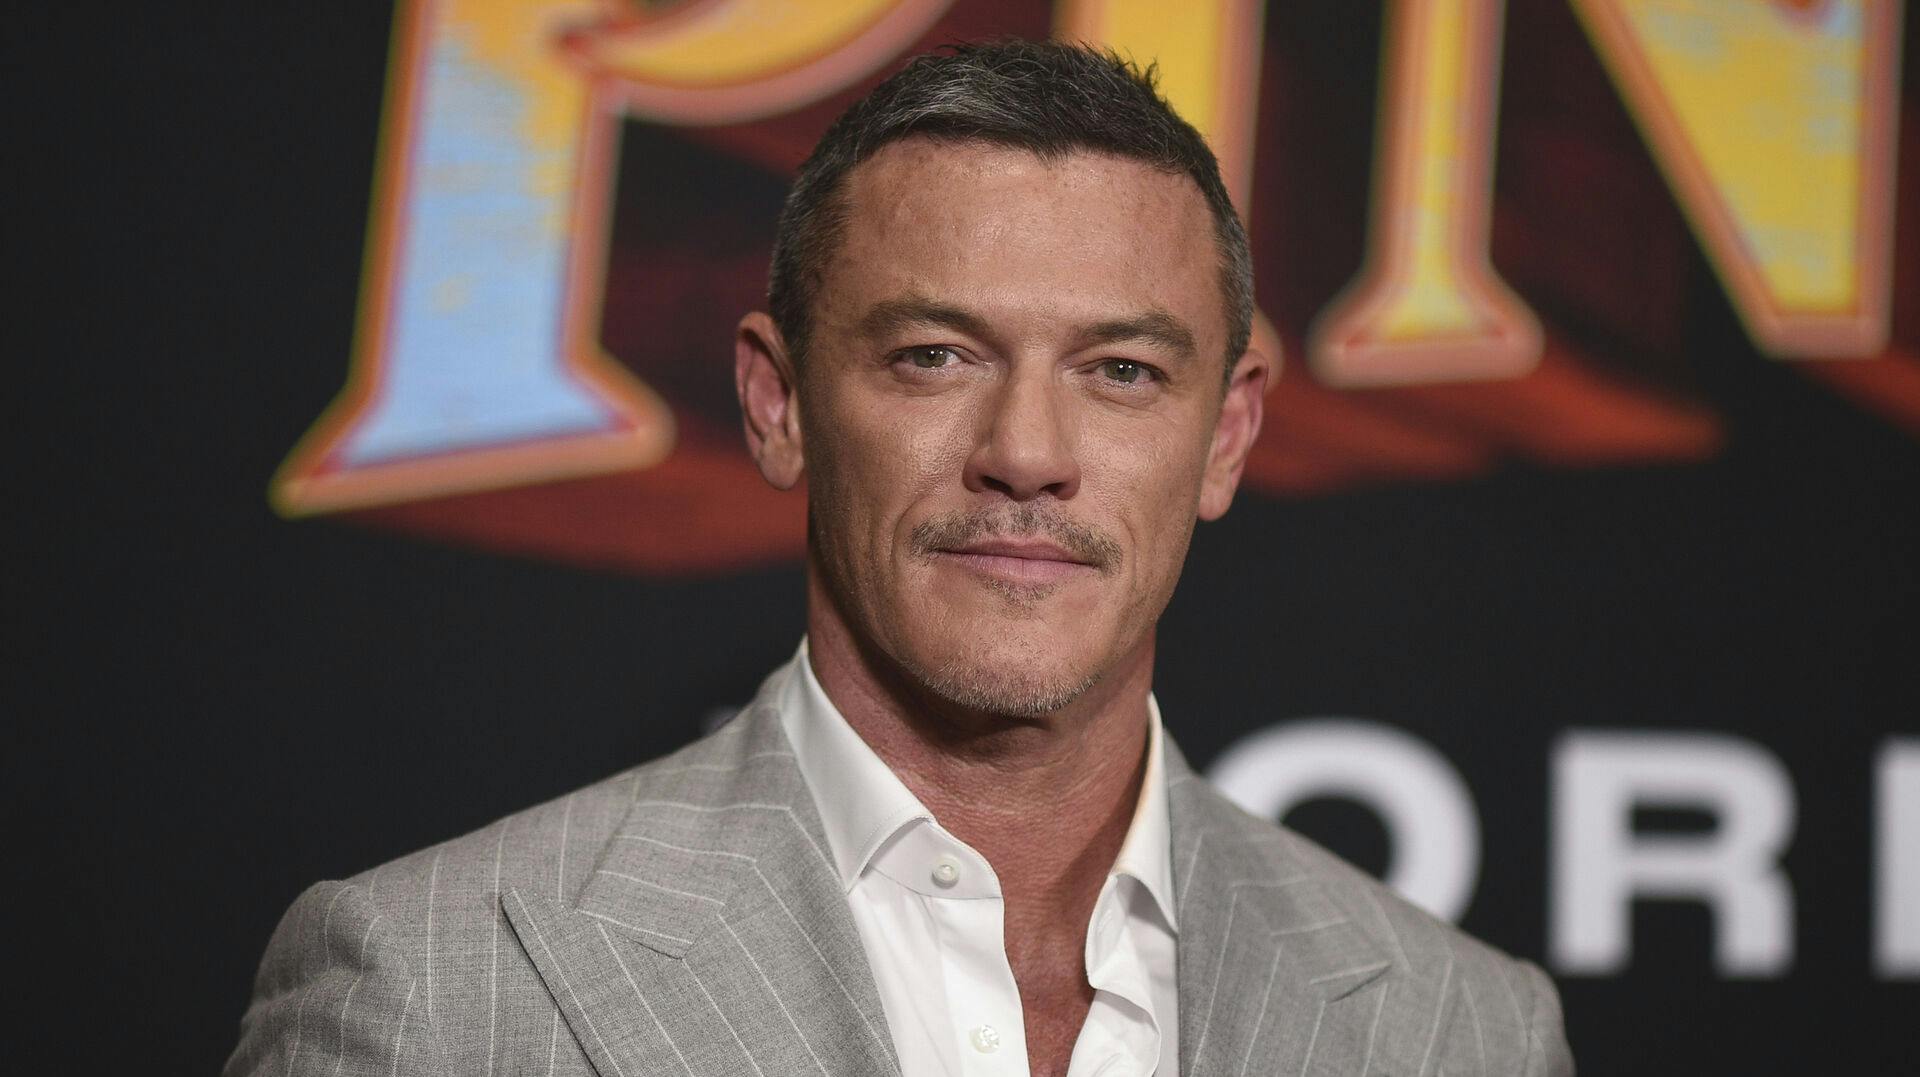 Luke Evans arrives at the world premiere of "Pinocchio" on Tuesday, Sept. 7, 2022, at Walt Disney Studios in Burbank, Calif. (Photo by Richard Shotwell/Invision/AP)